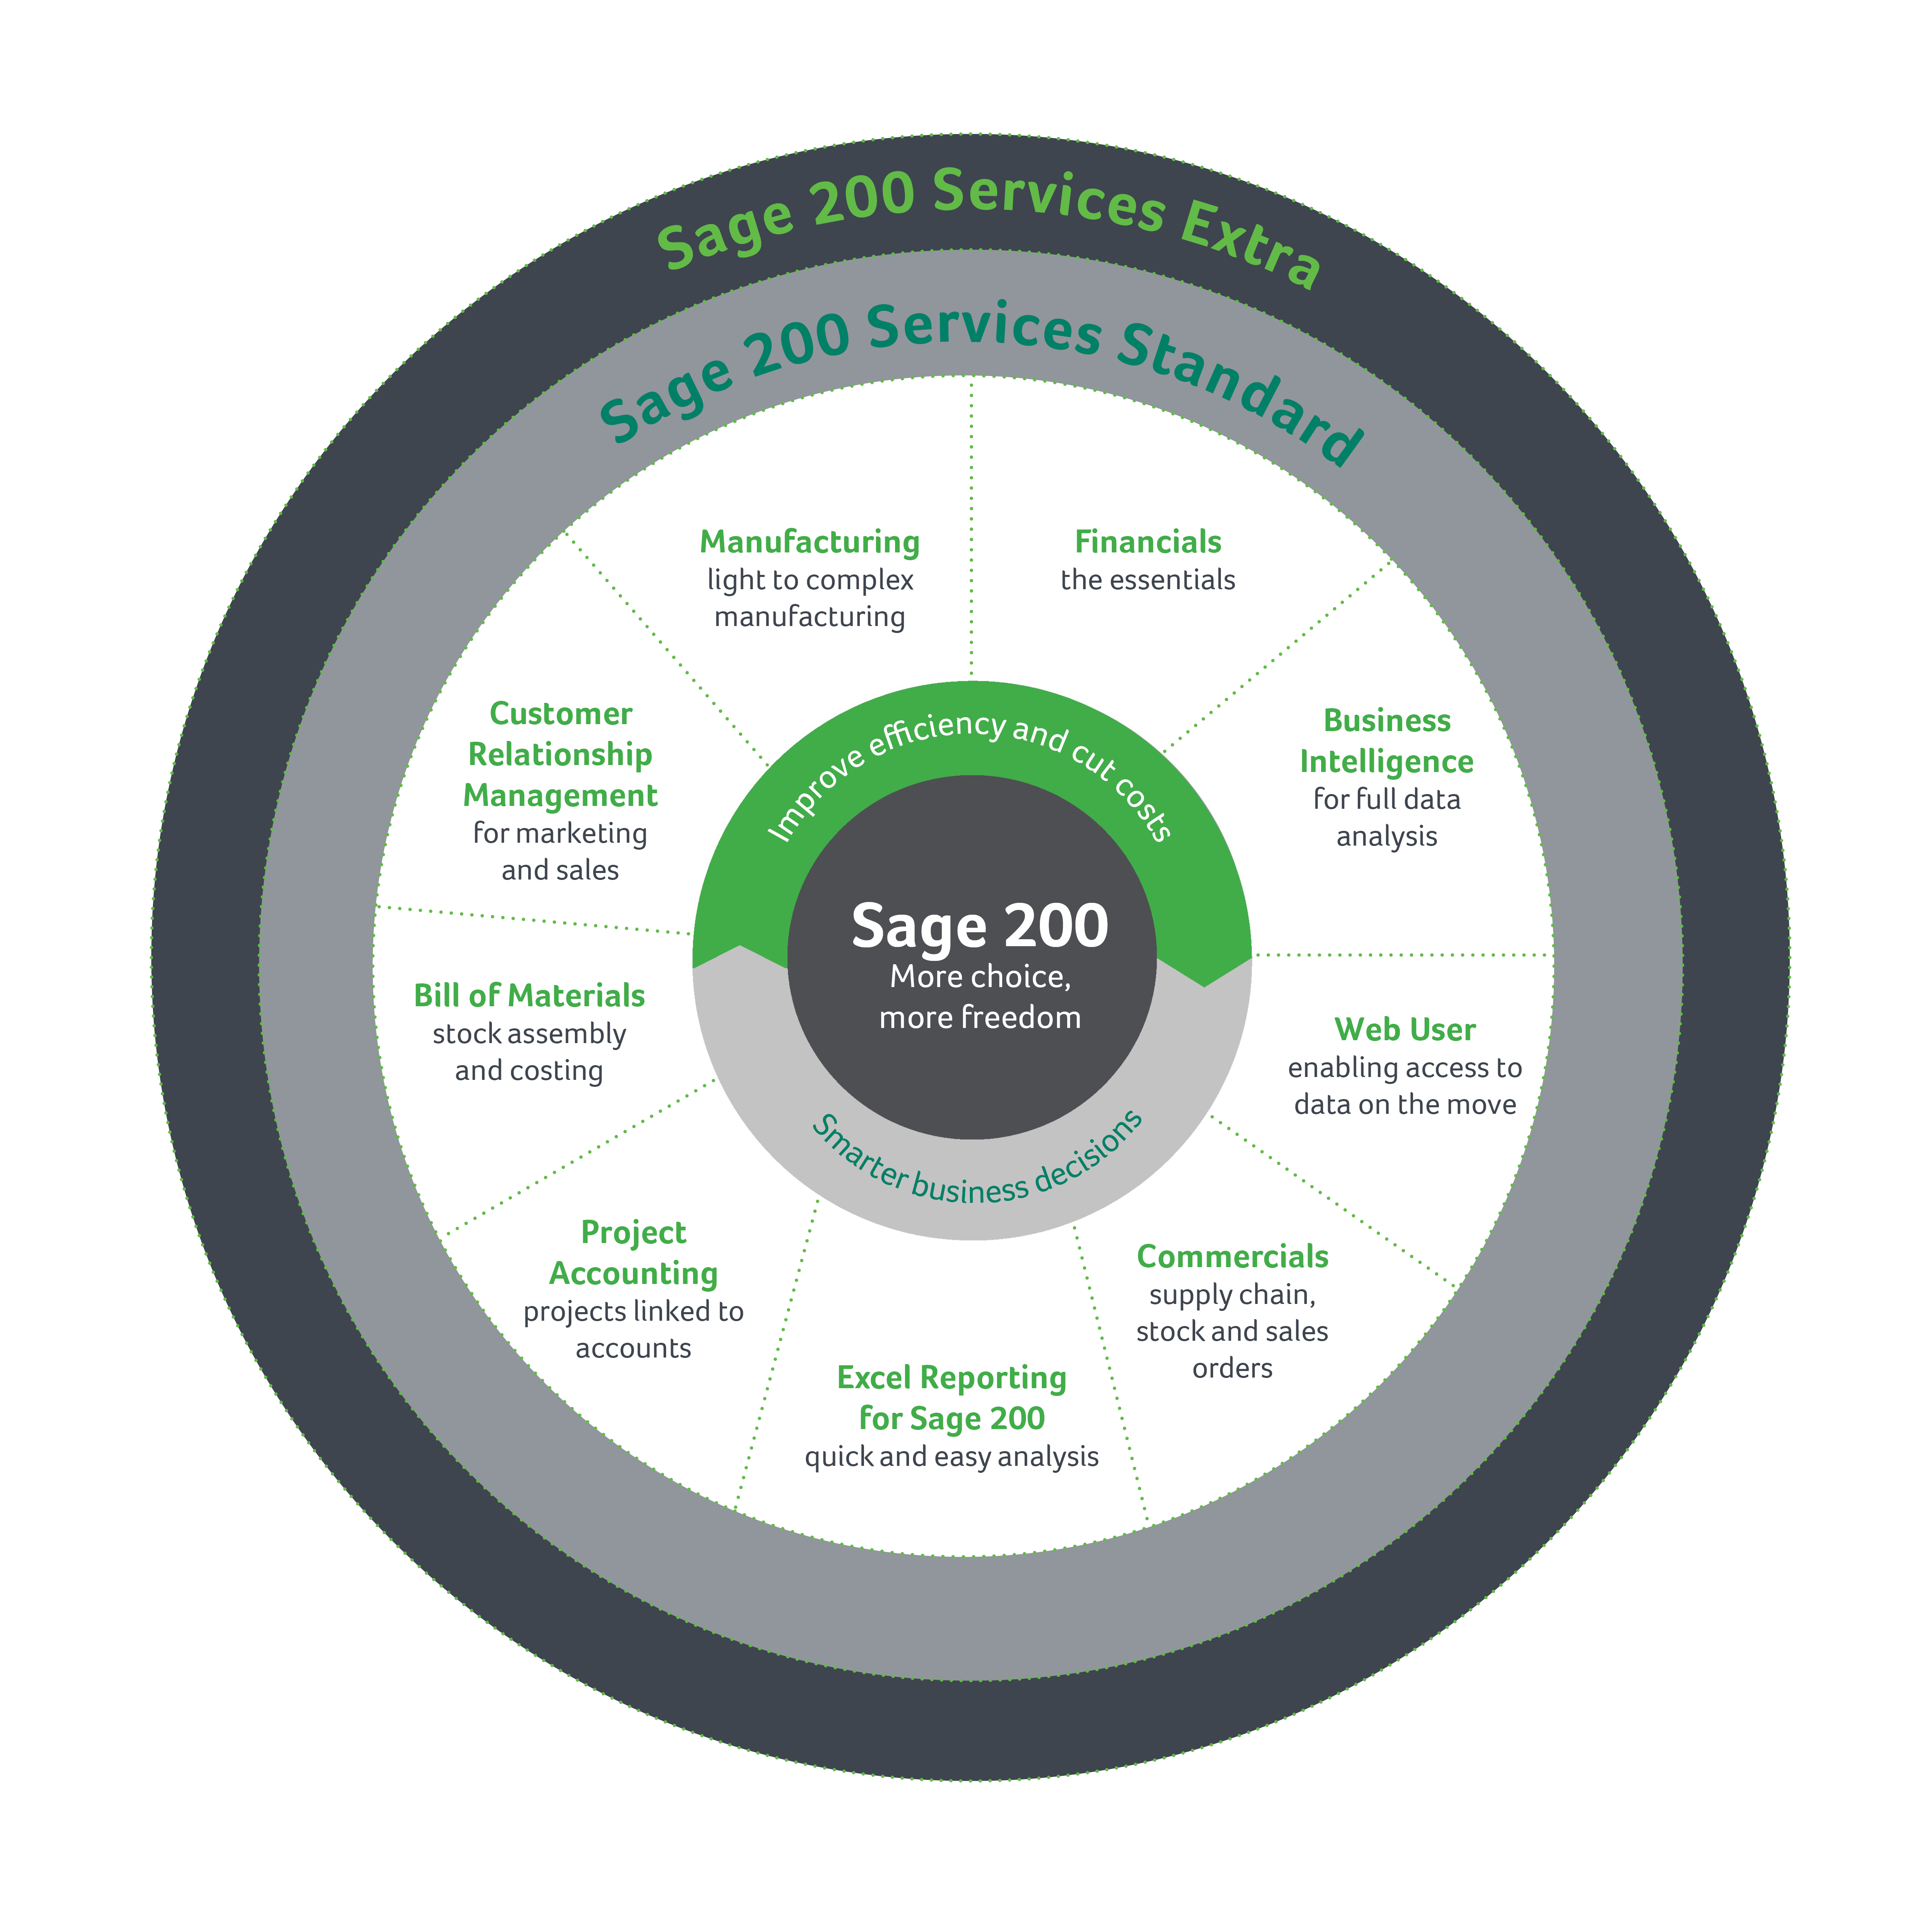 Cc support. Sage анализ. Manufacturing and services.